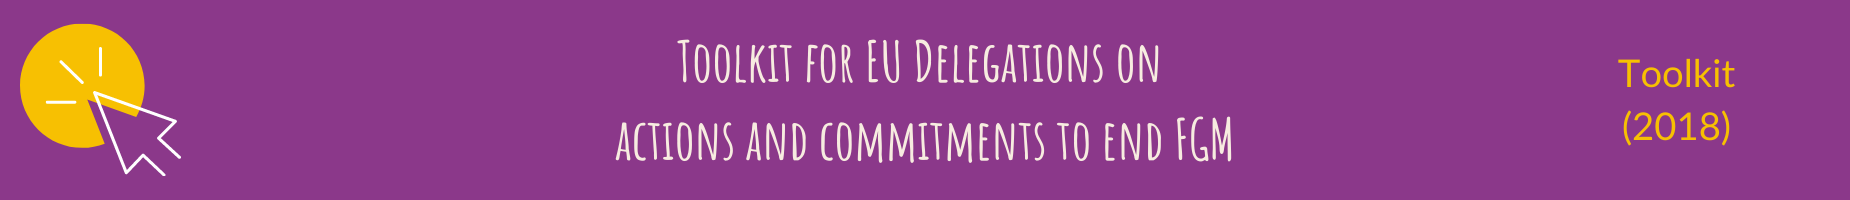 Toolkit for EU Delegations on actions and commitments to end FGM - Toolkit (2018)